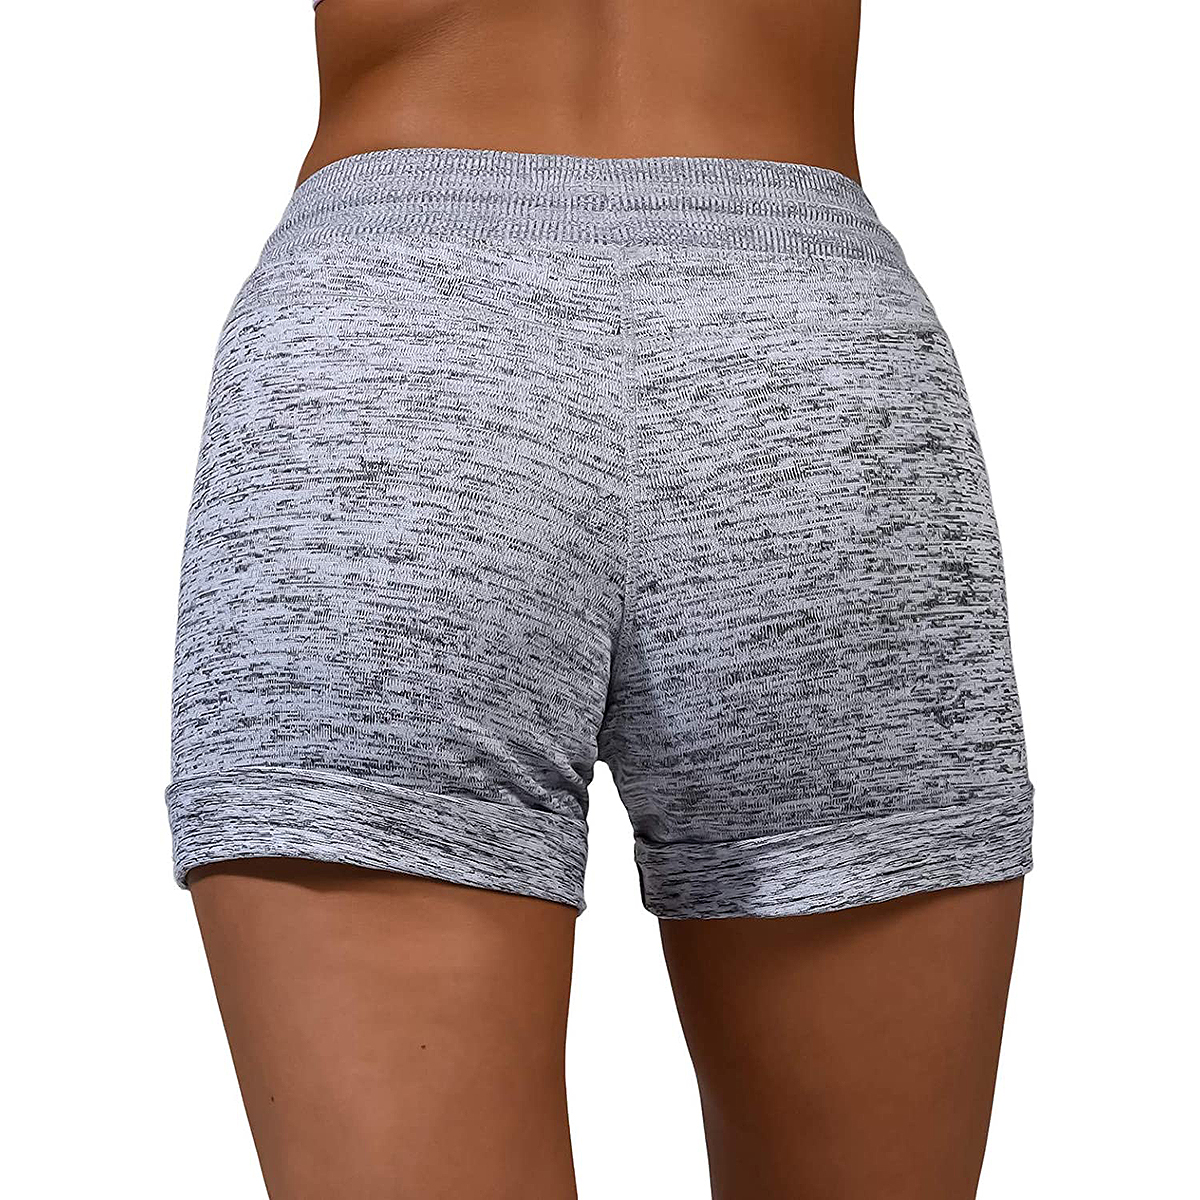 90 Degree by Reflex Soft and Comfy Activewear Lounge Shorts